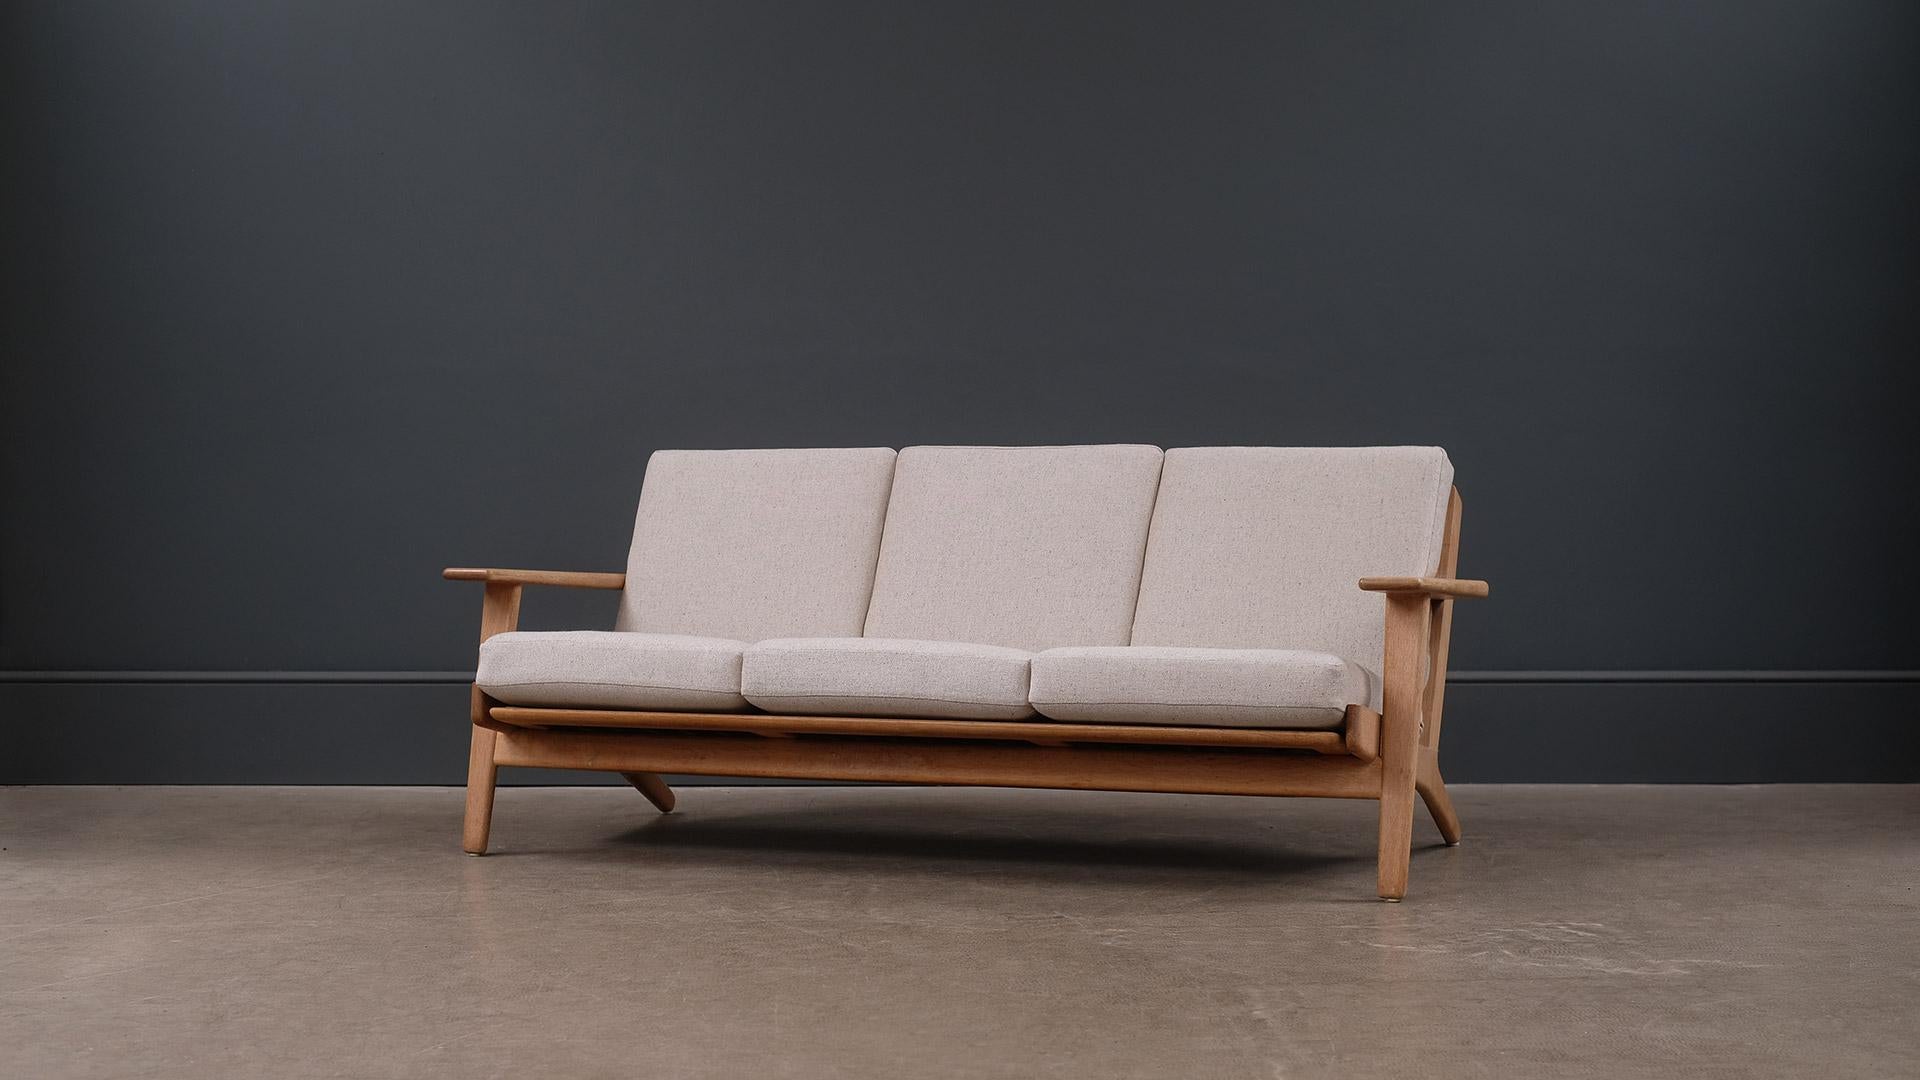 Classic three-seat sofa model GE290 designed by Hans Wegner for GETAMA, Denmark. Solid oak frame with fully reconditioned and reupholstered original sprung cushions.